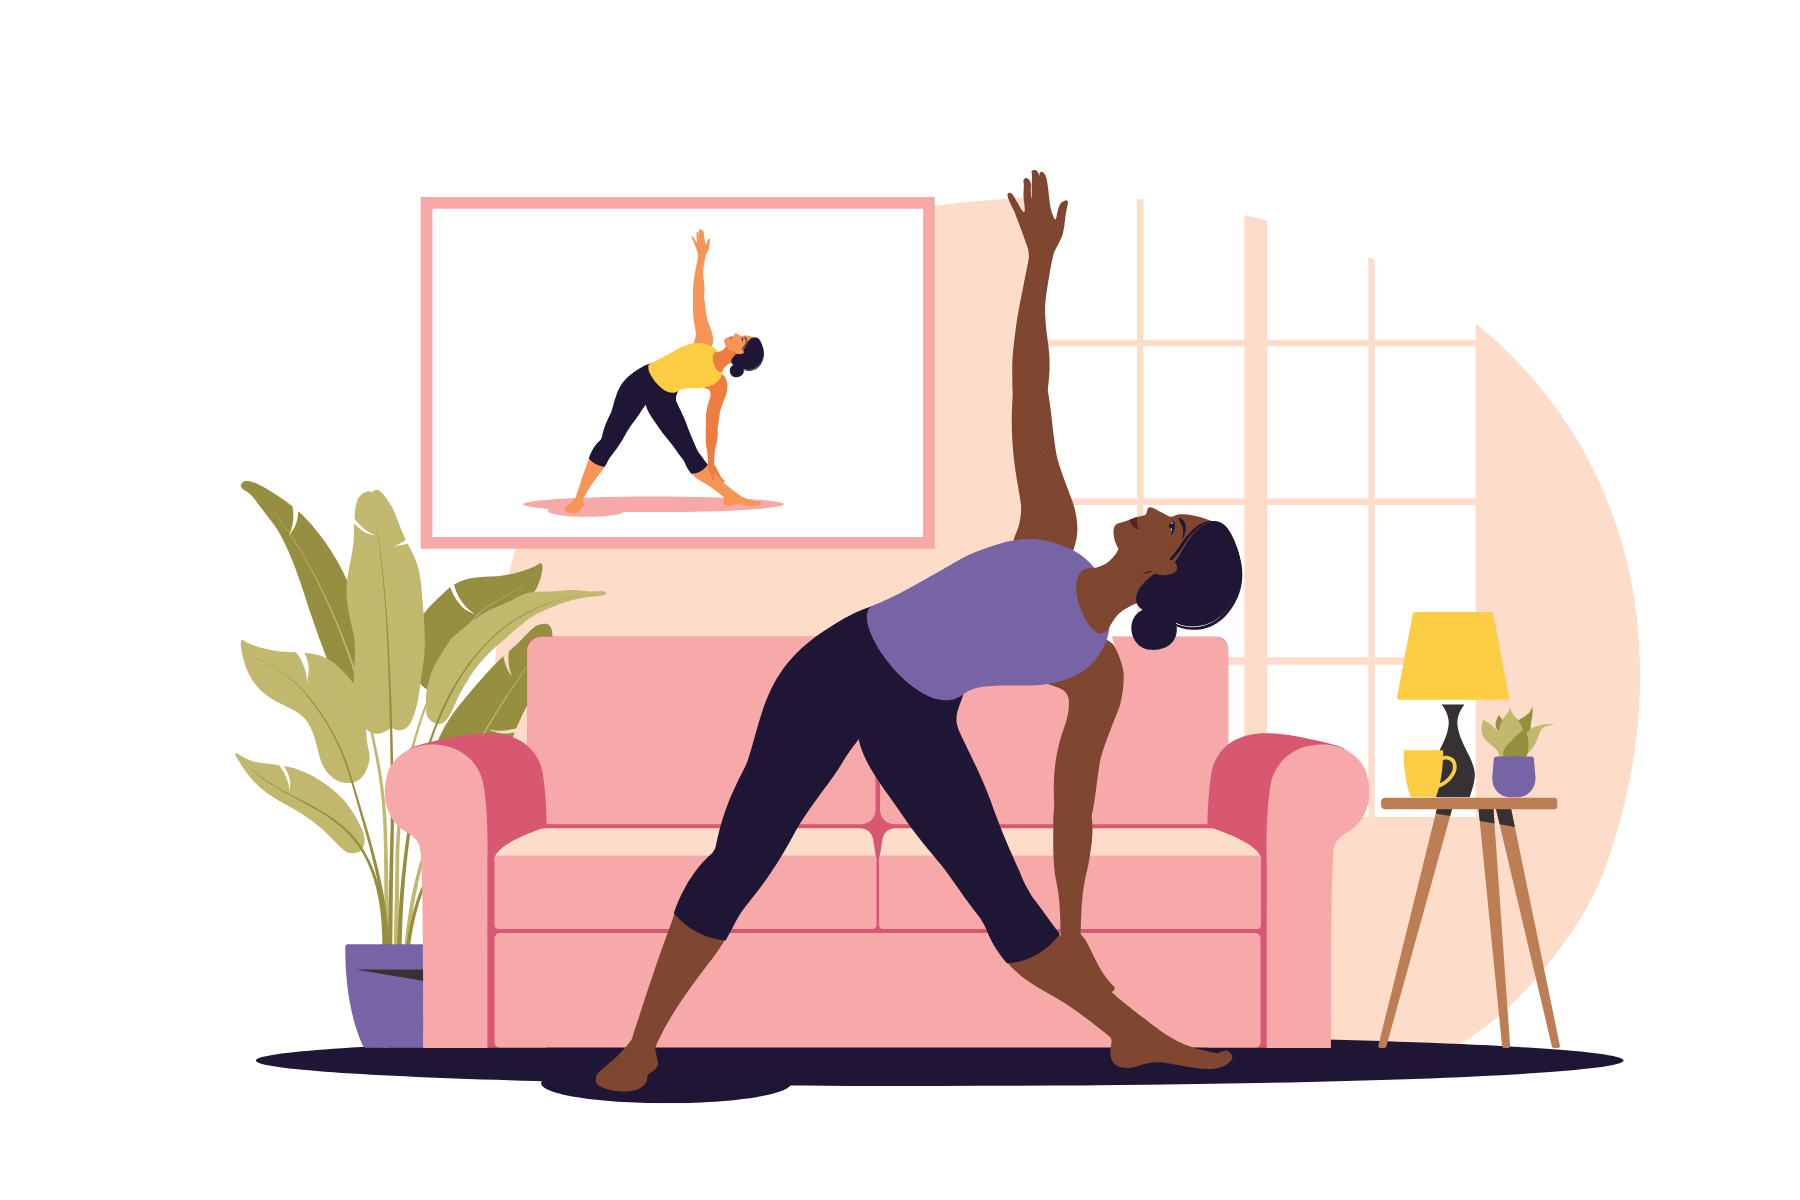 Image of someone working out in their own home